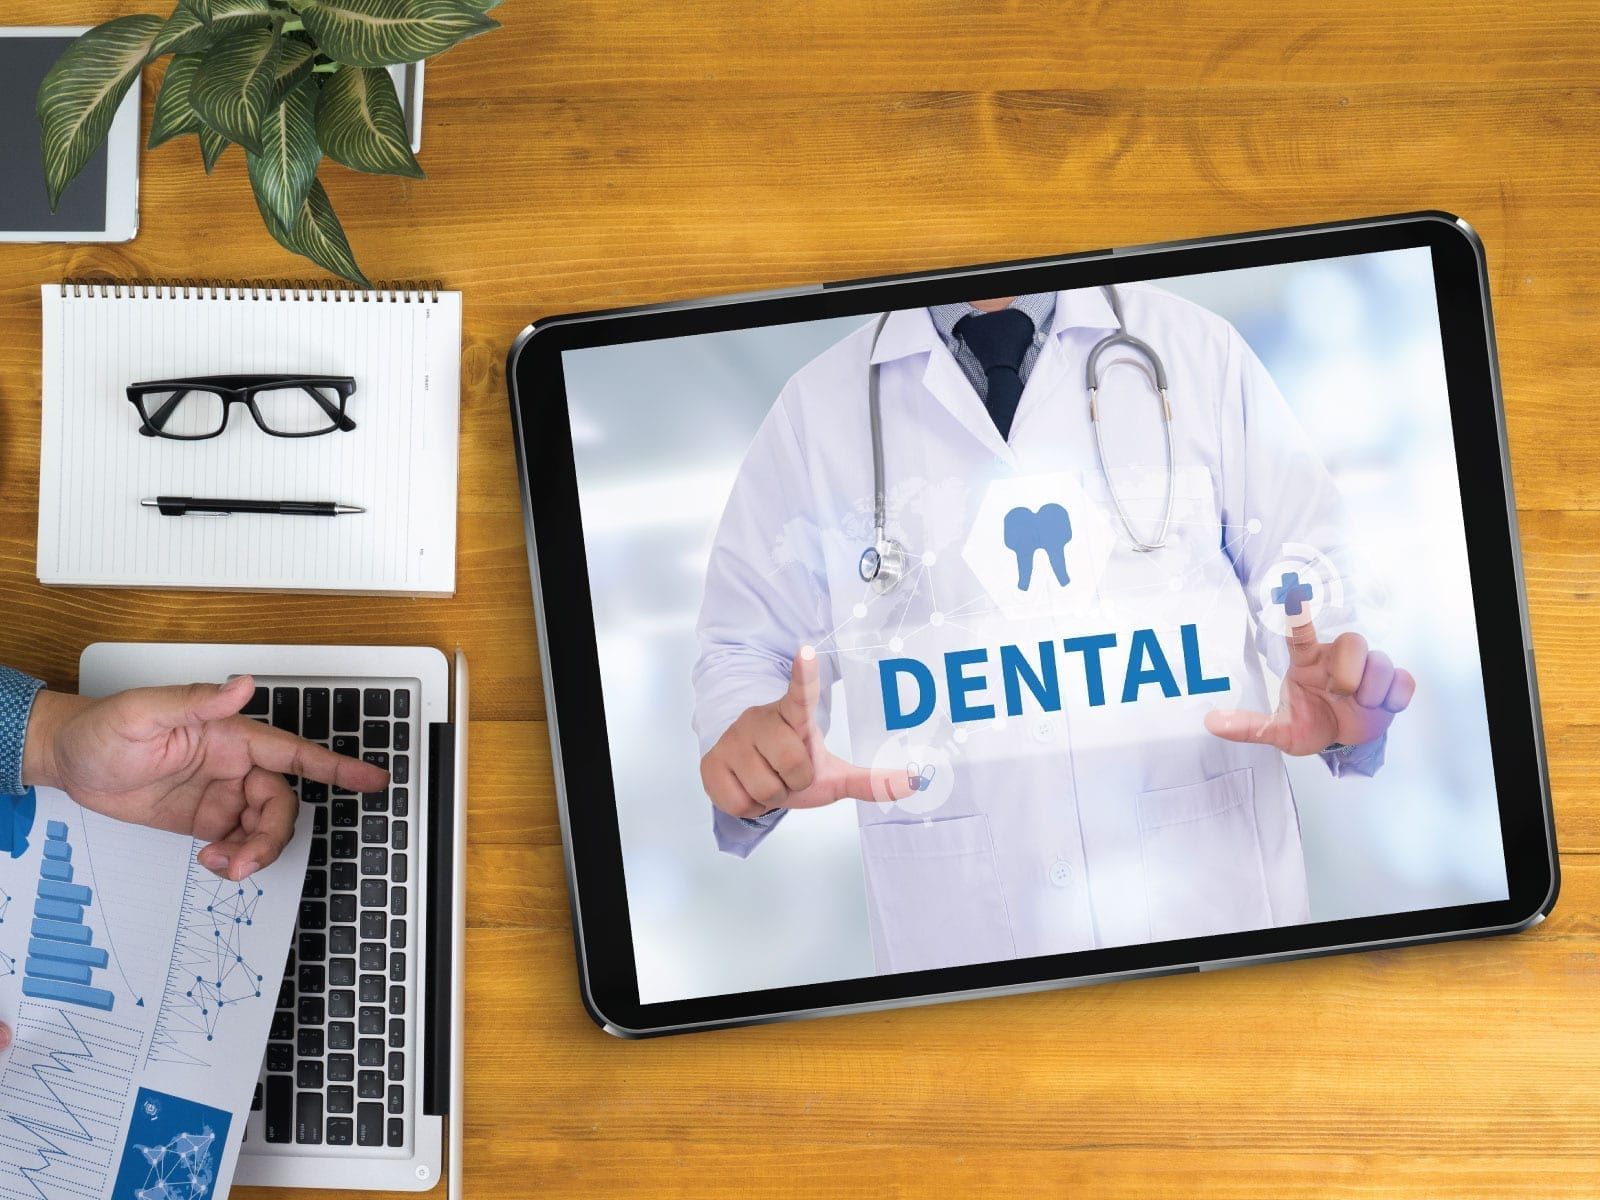 Dental website image on a tablet device laying on a wooden desk